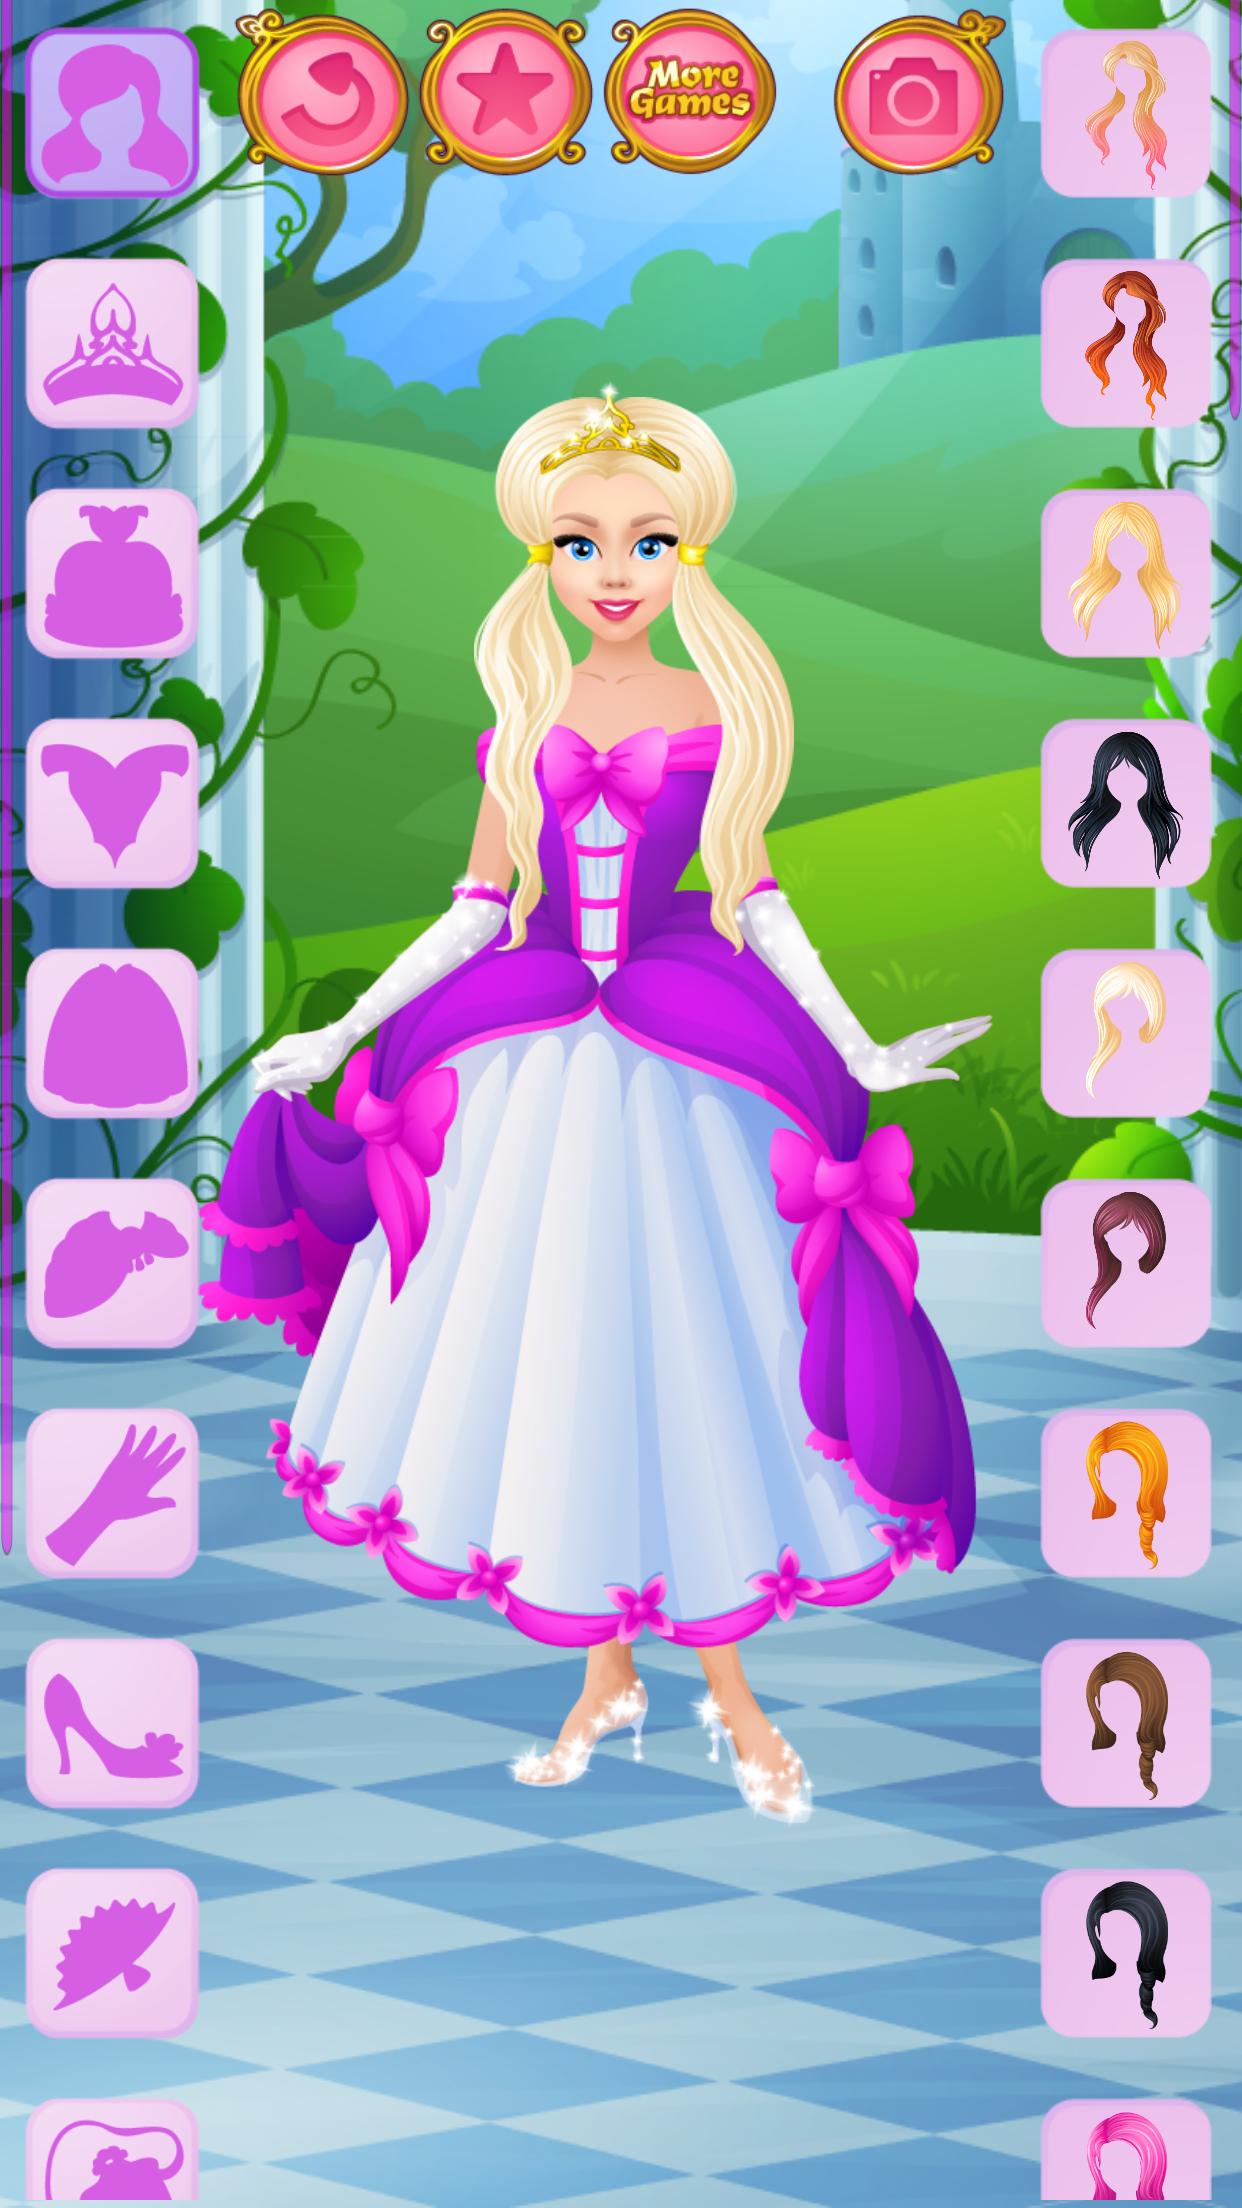 Dress up - Games for Girls for Android - APK Download